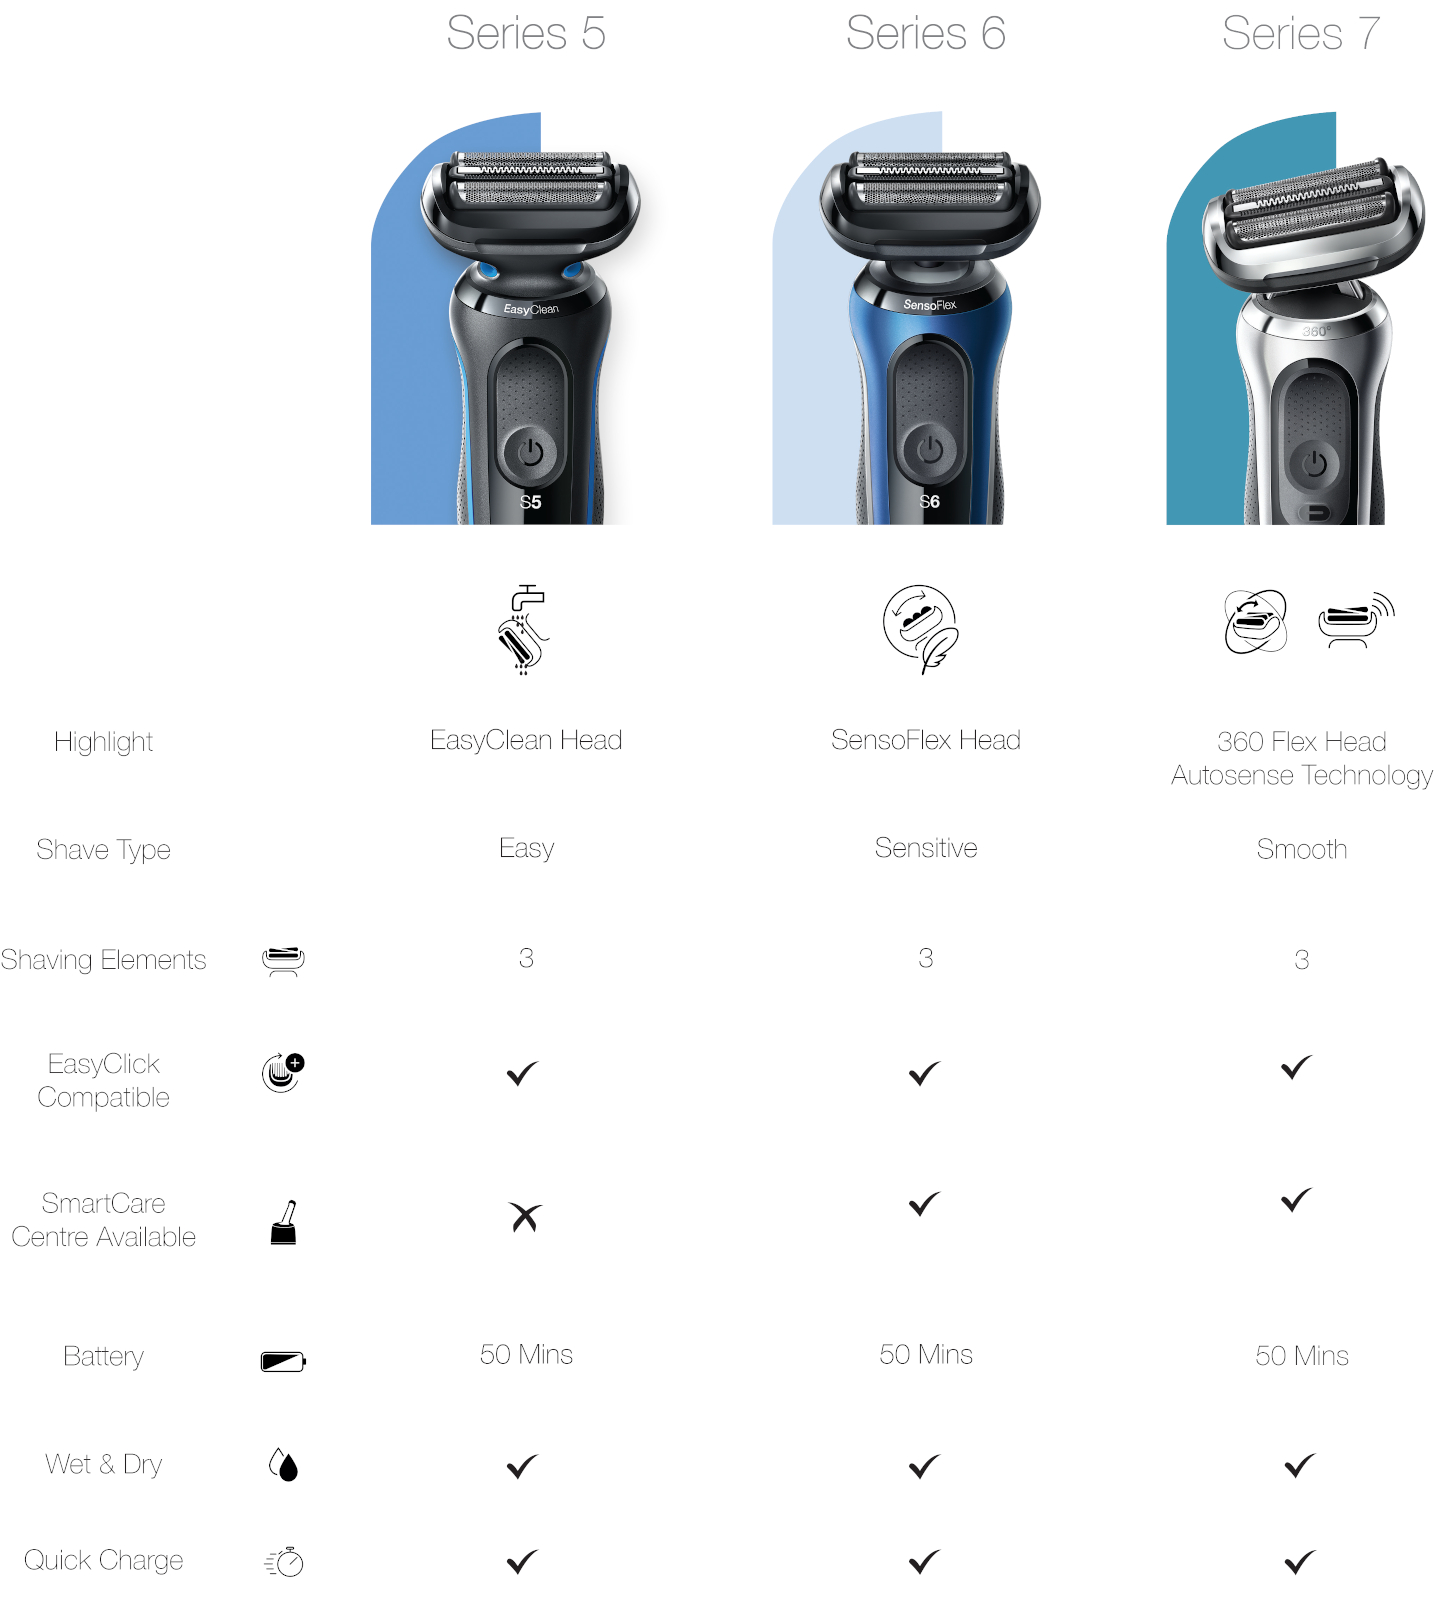 Series 5, series 6, series 7. Highlight , Shave type, Shaving elements, EasyClick Compatible, SmartCare Centre Awards, Battery, Wet & Dry, Quick charge.